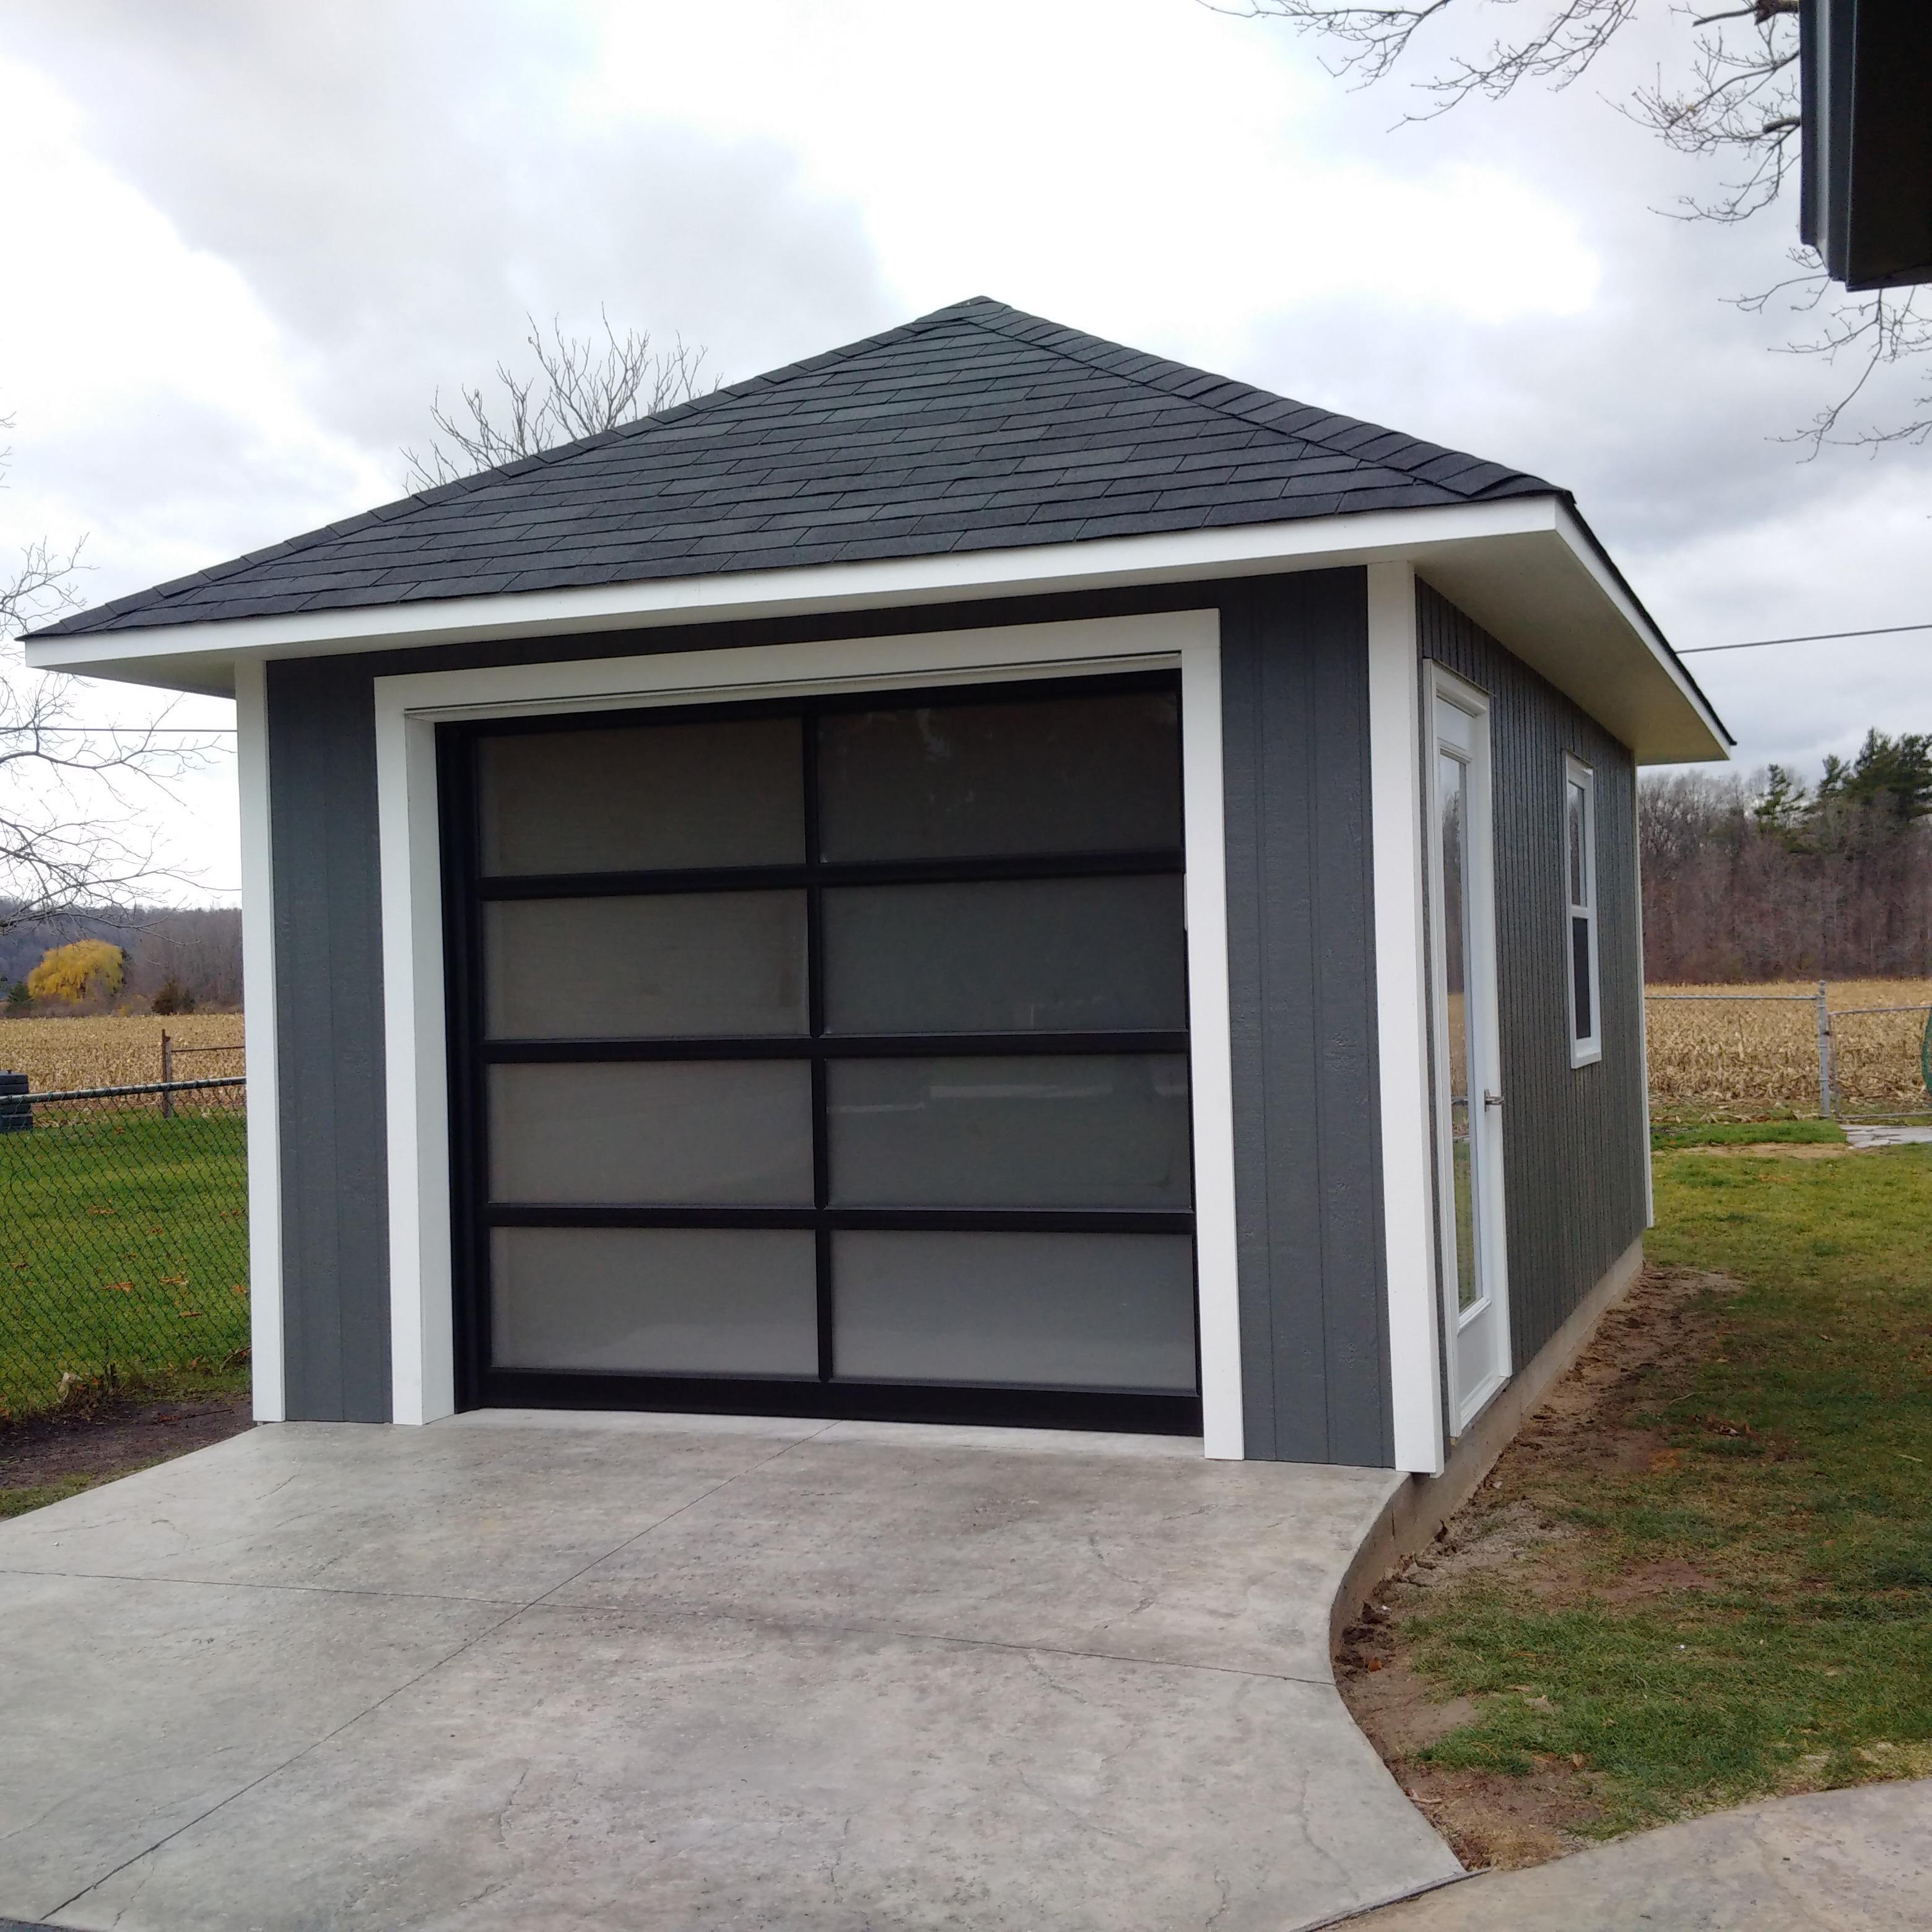 Archer garage 12 x 20 with Canexel Granite Siding in Grimsby Ontario ID number -208383 -2